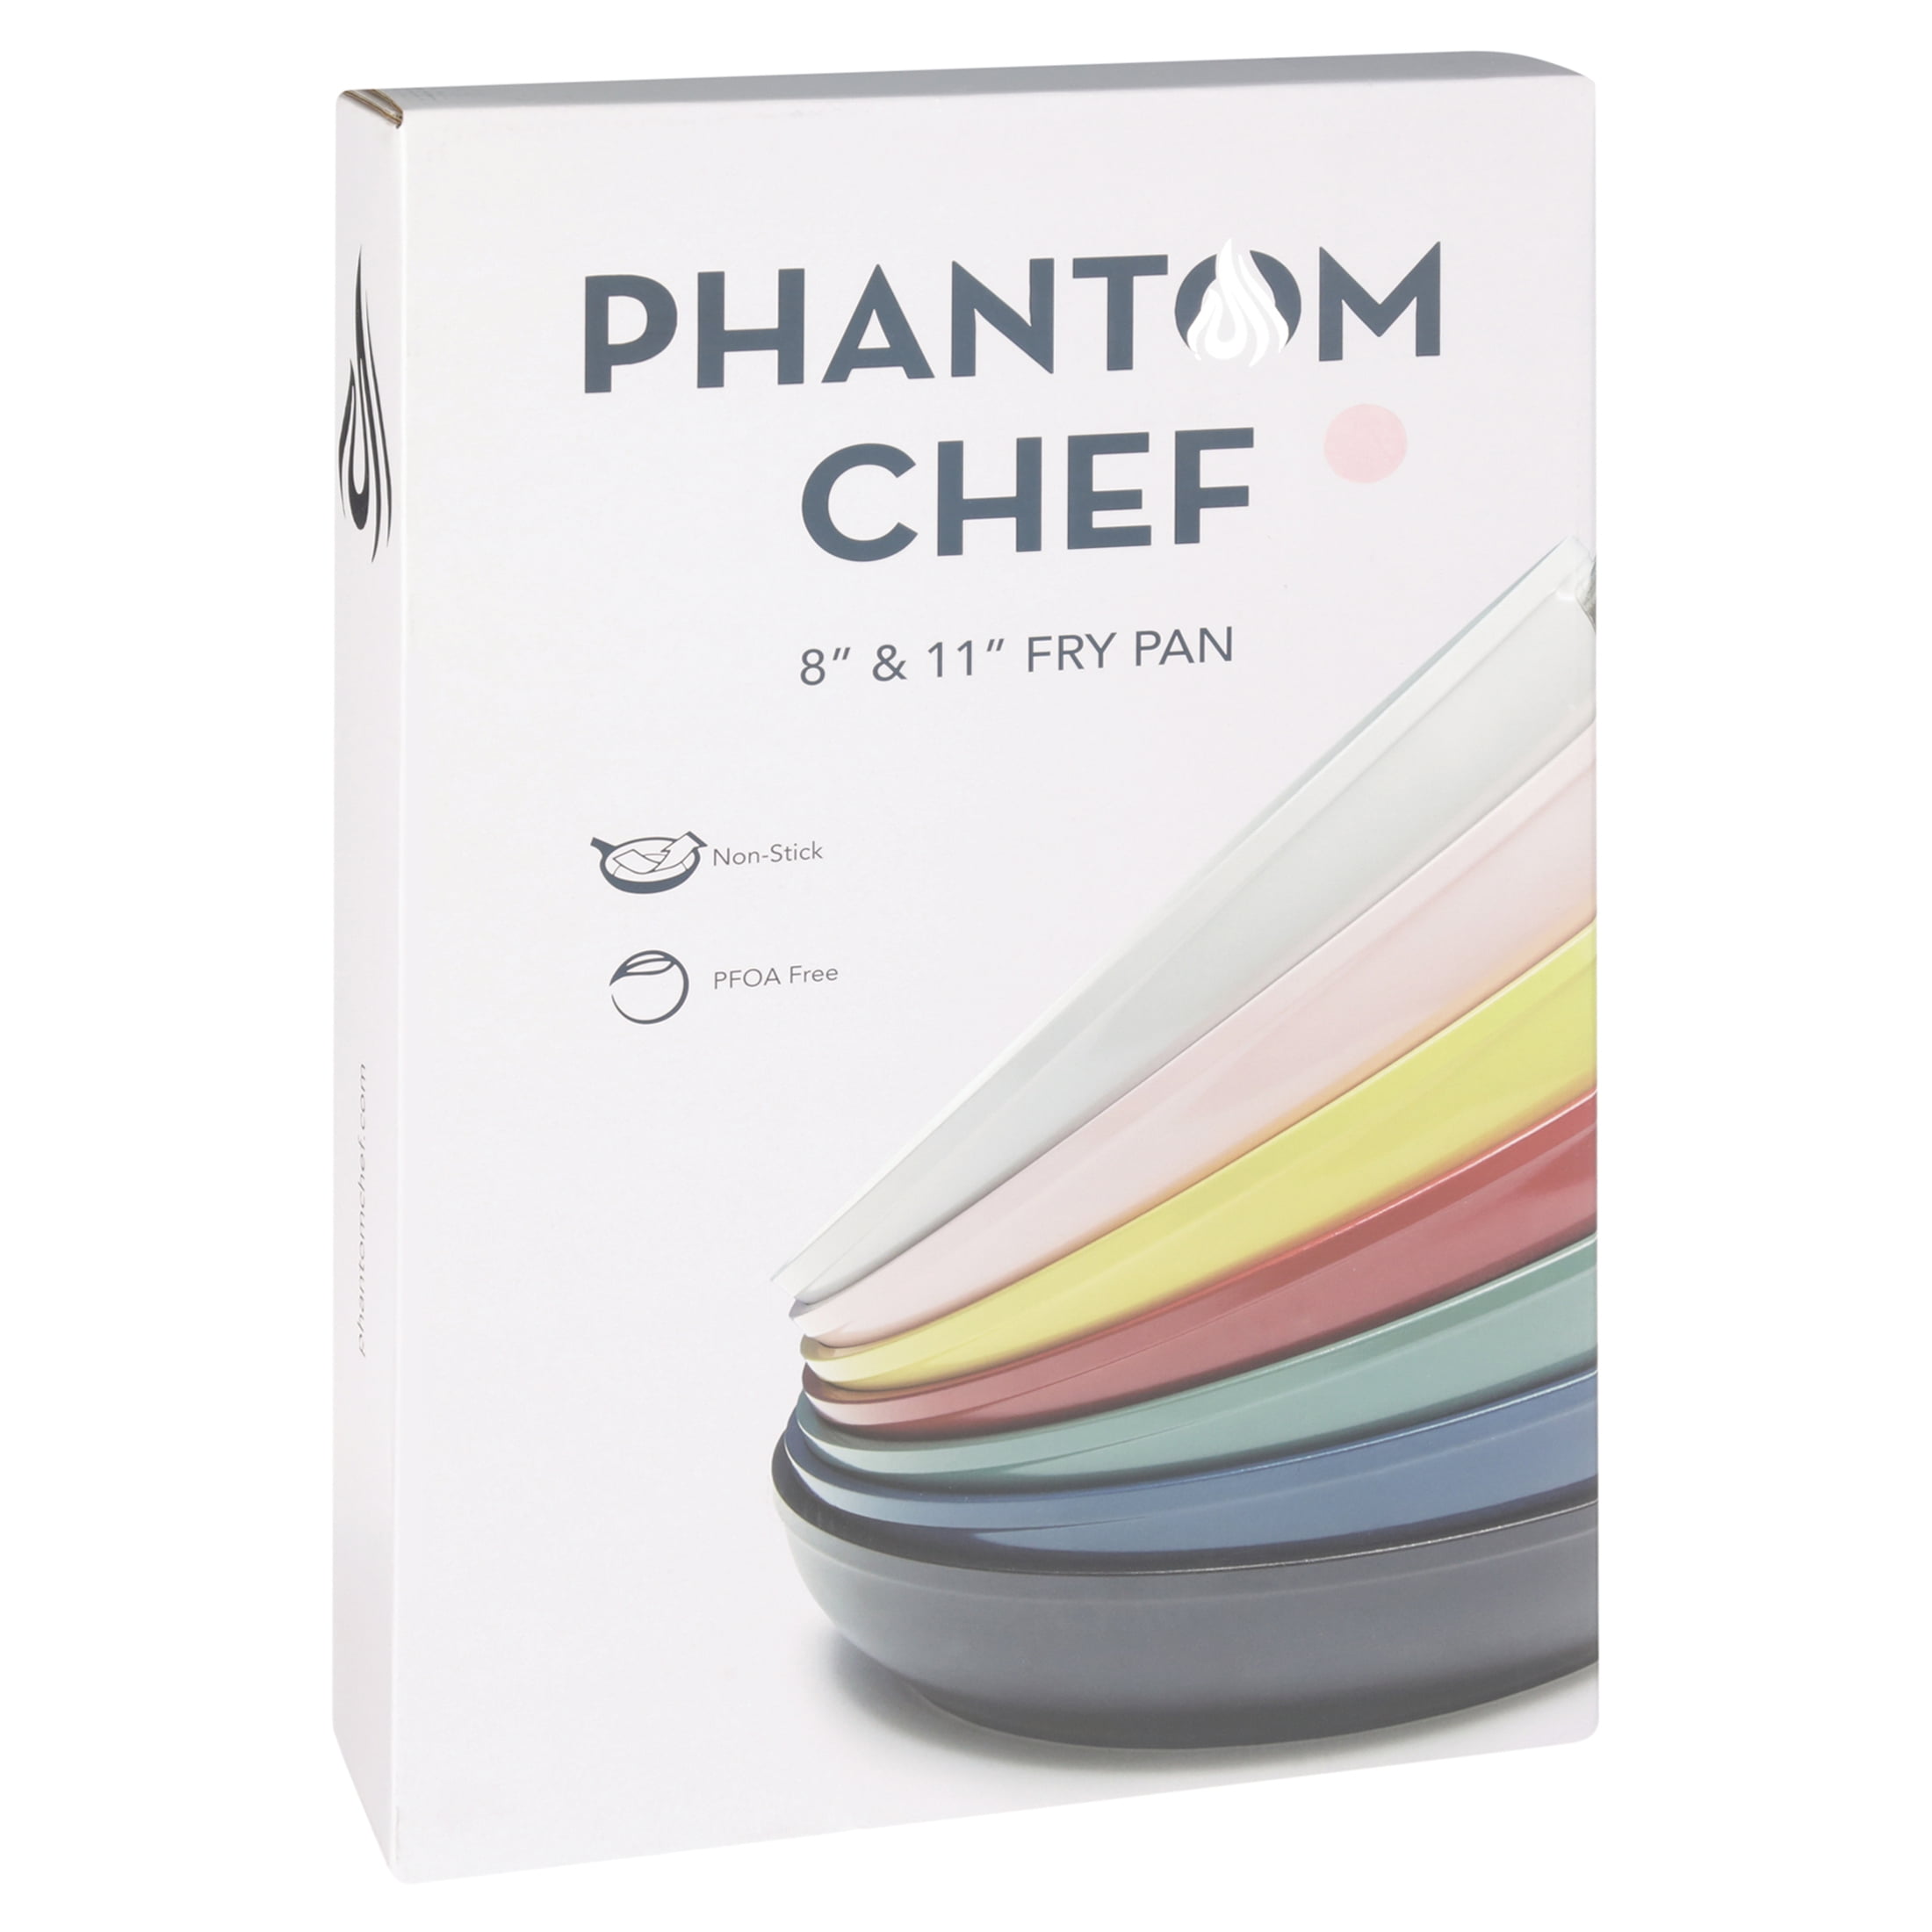 Phantom Chef 8 inch & 11 inch Frypan with Wood Handle and Aluminum